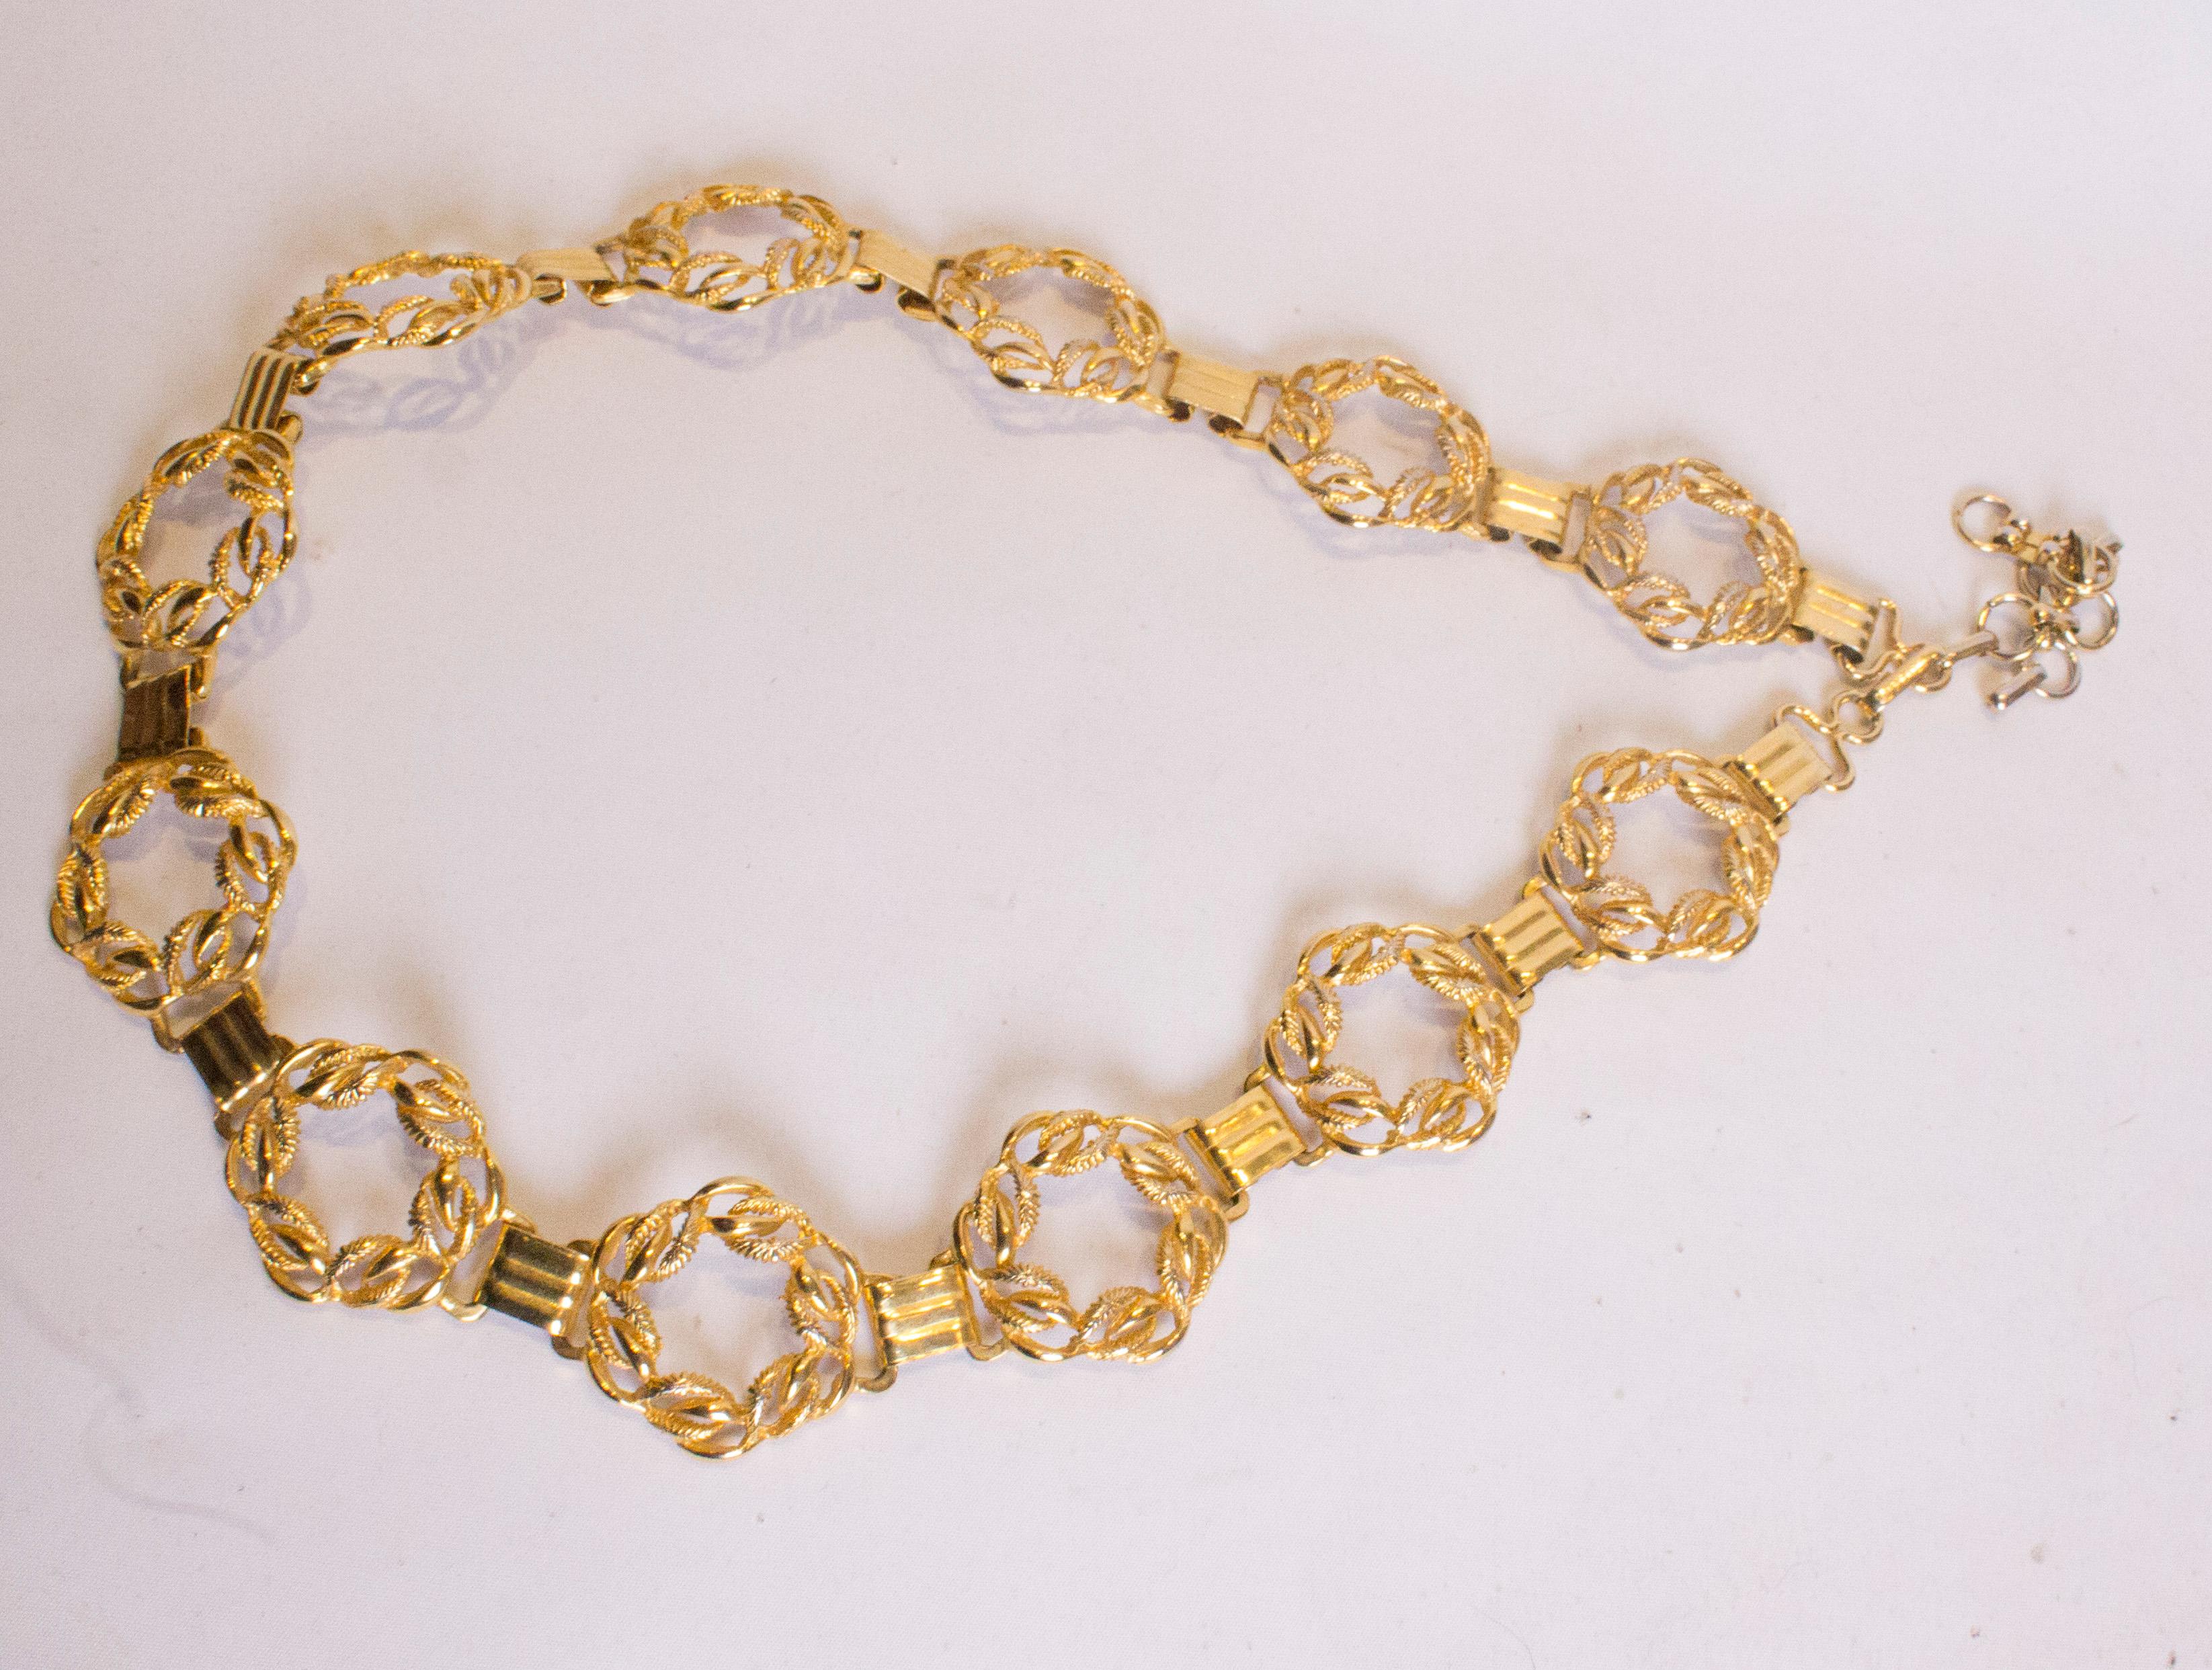 Vintage Chain Belt with Circular links